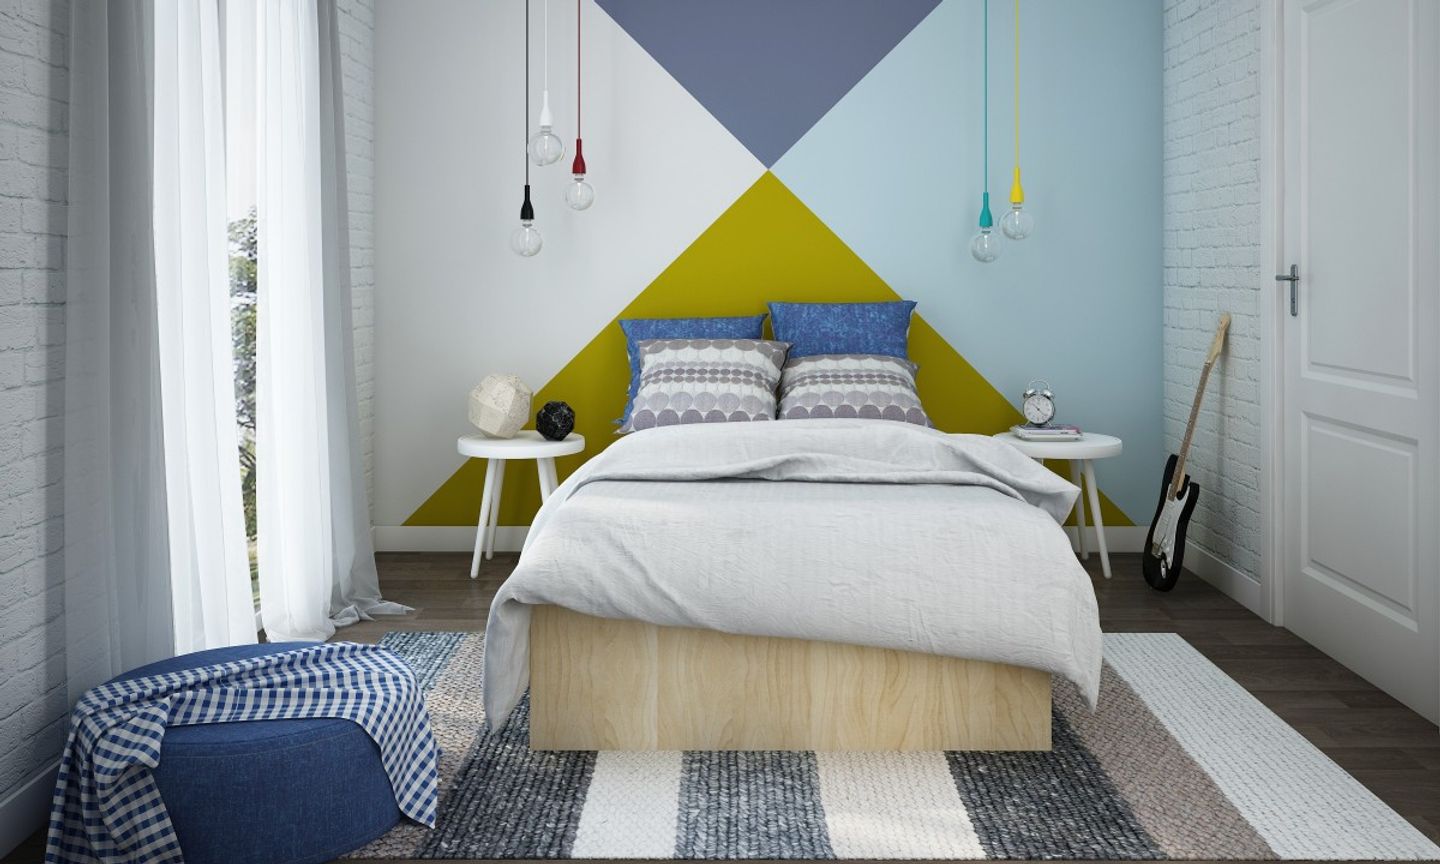 Modern Kid's Bedroom Design With Yellow And Blue Interiors